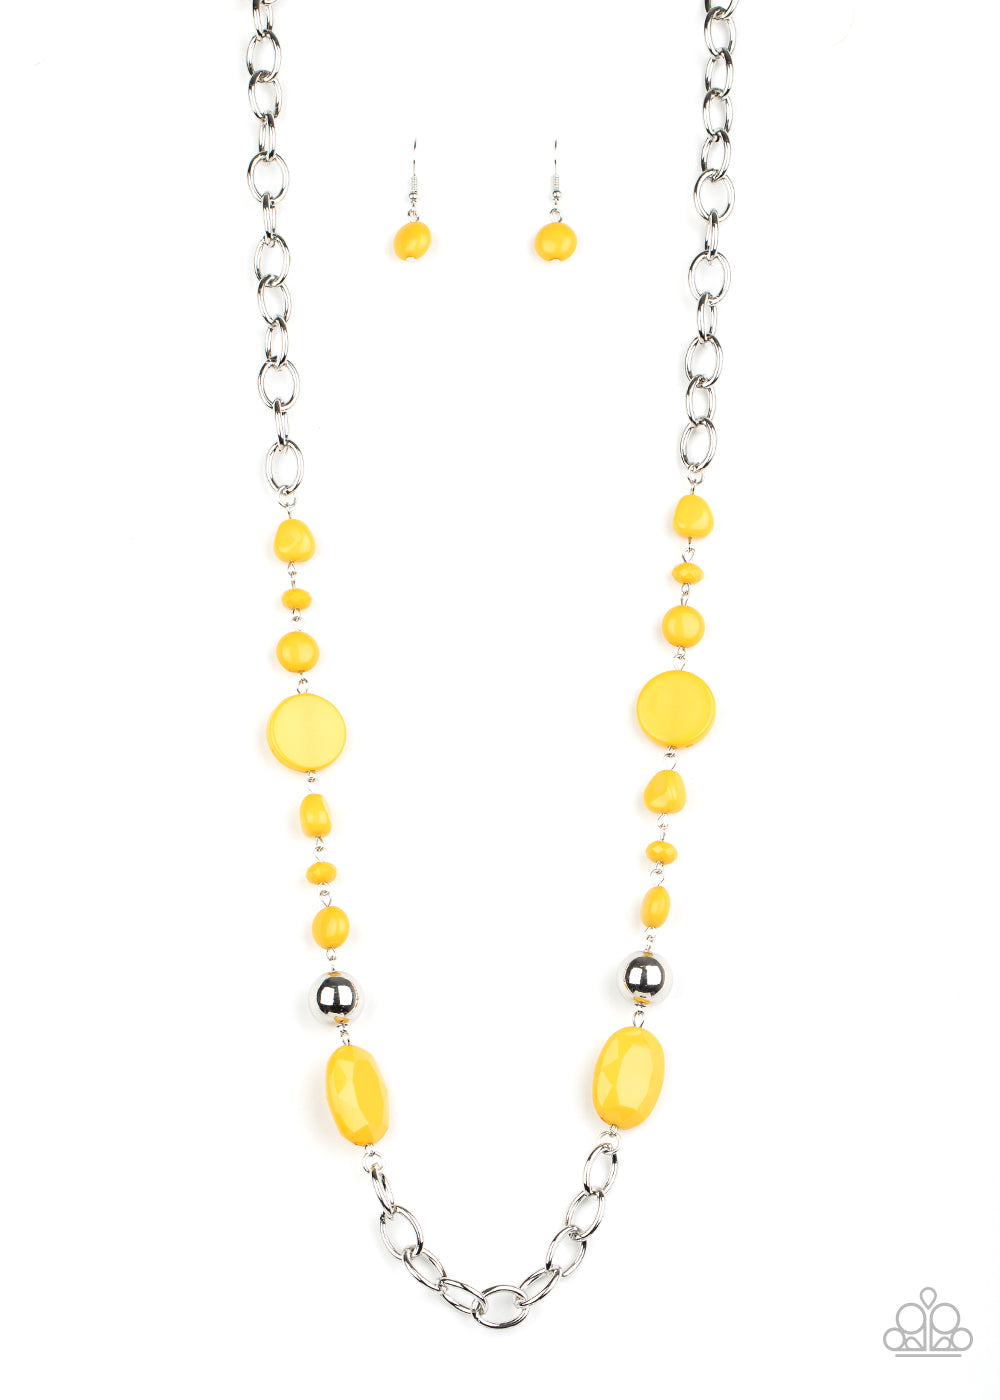 When I GLOW Up Necklace - Yellow